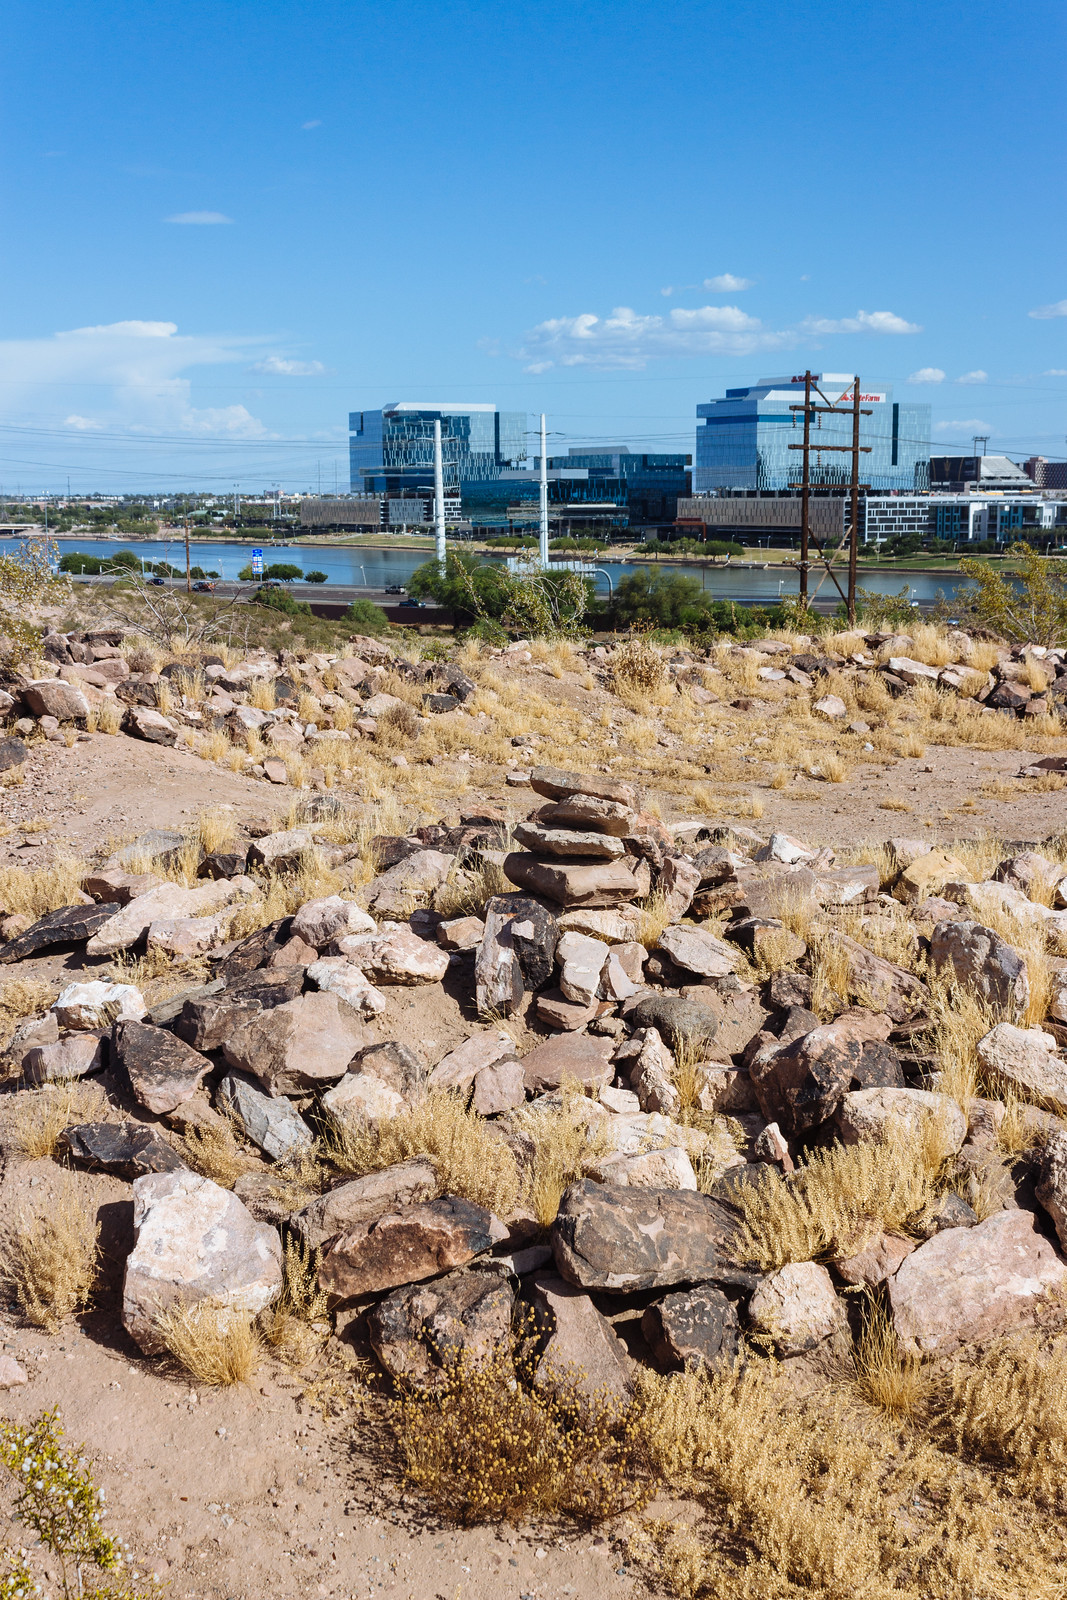 Stone ruins overlooking a lake and glassy office buildings in Tempe, Arizona